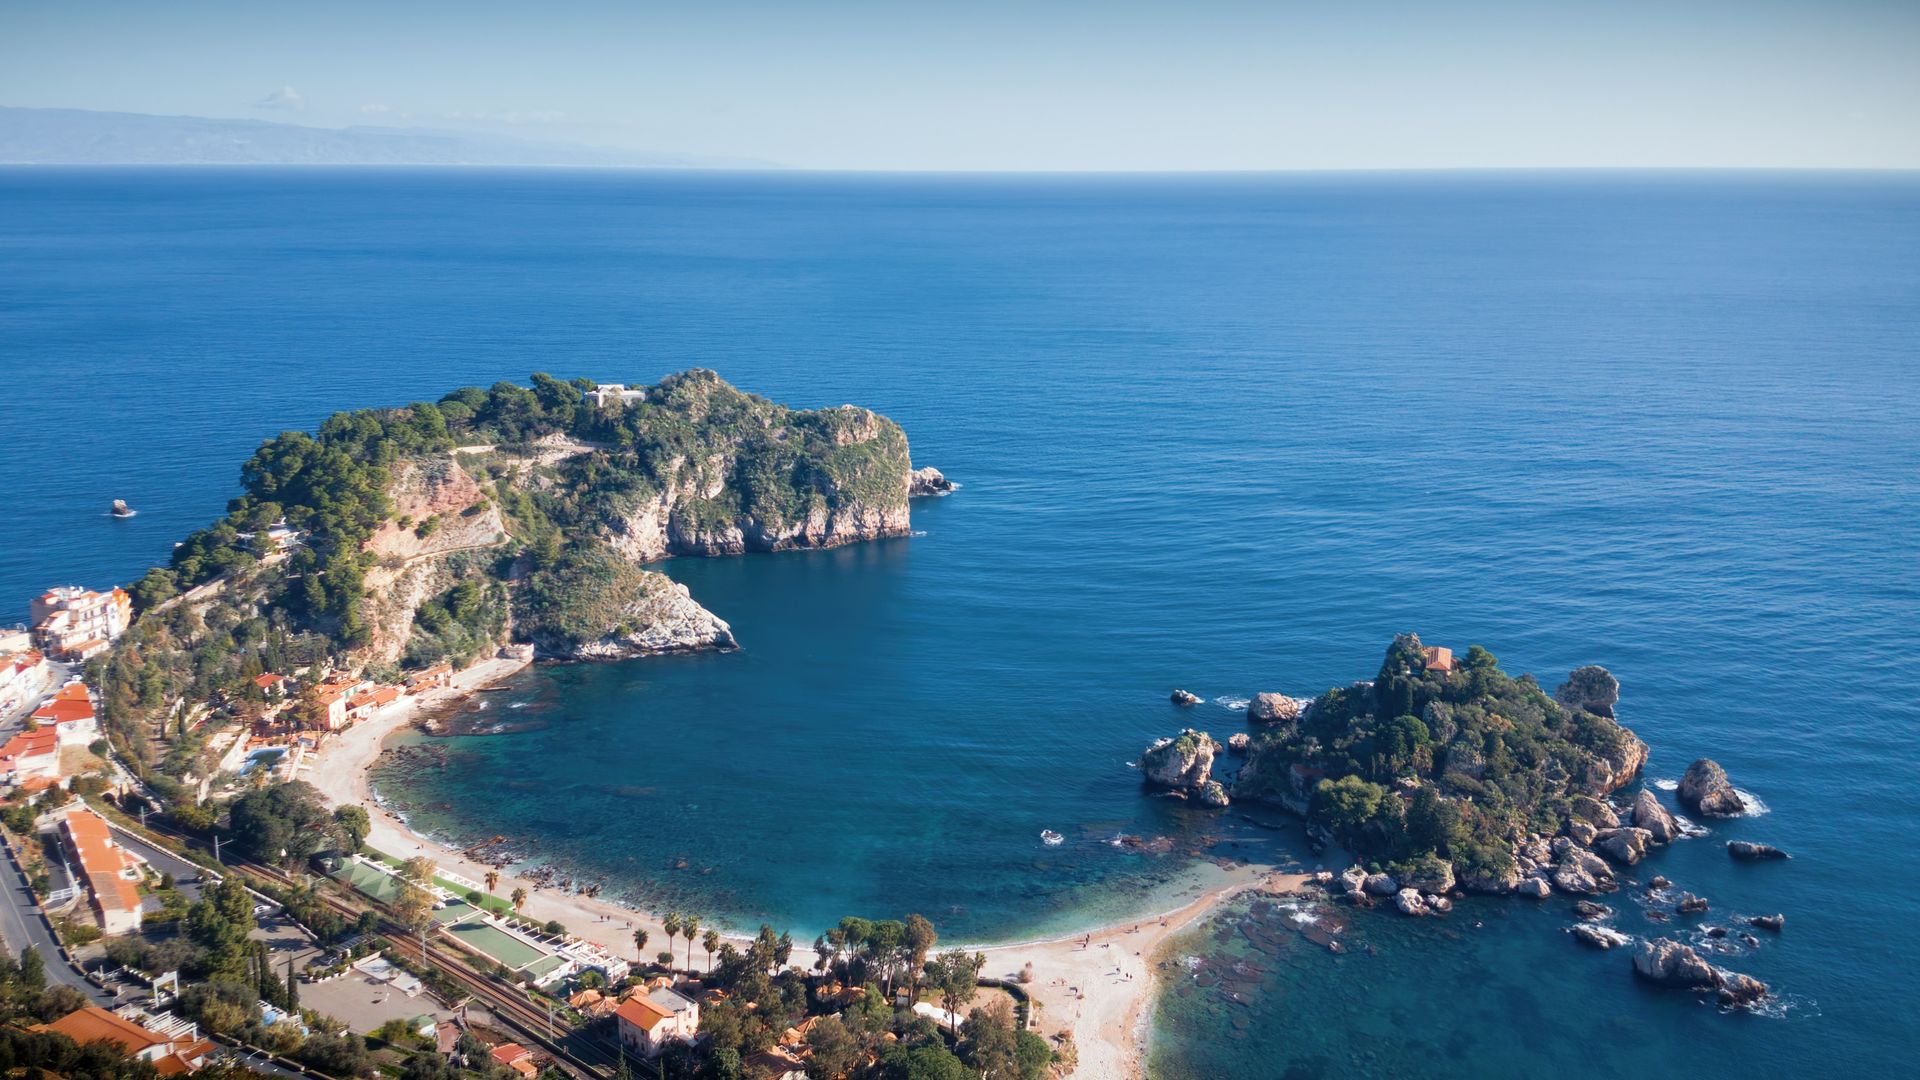 Sicily: 5 interesting facts about this island